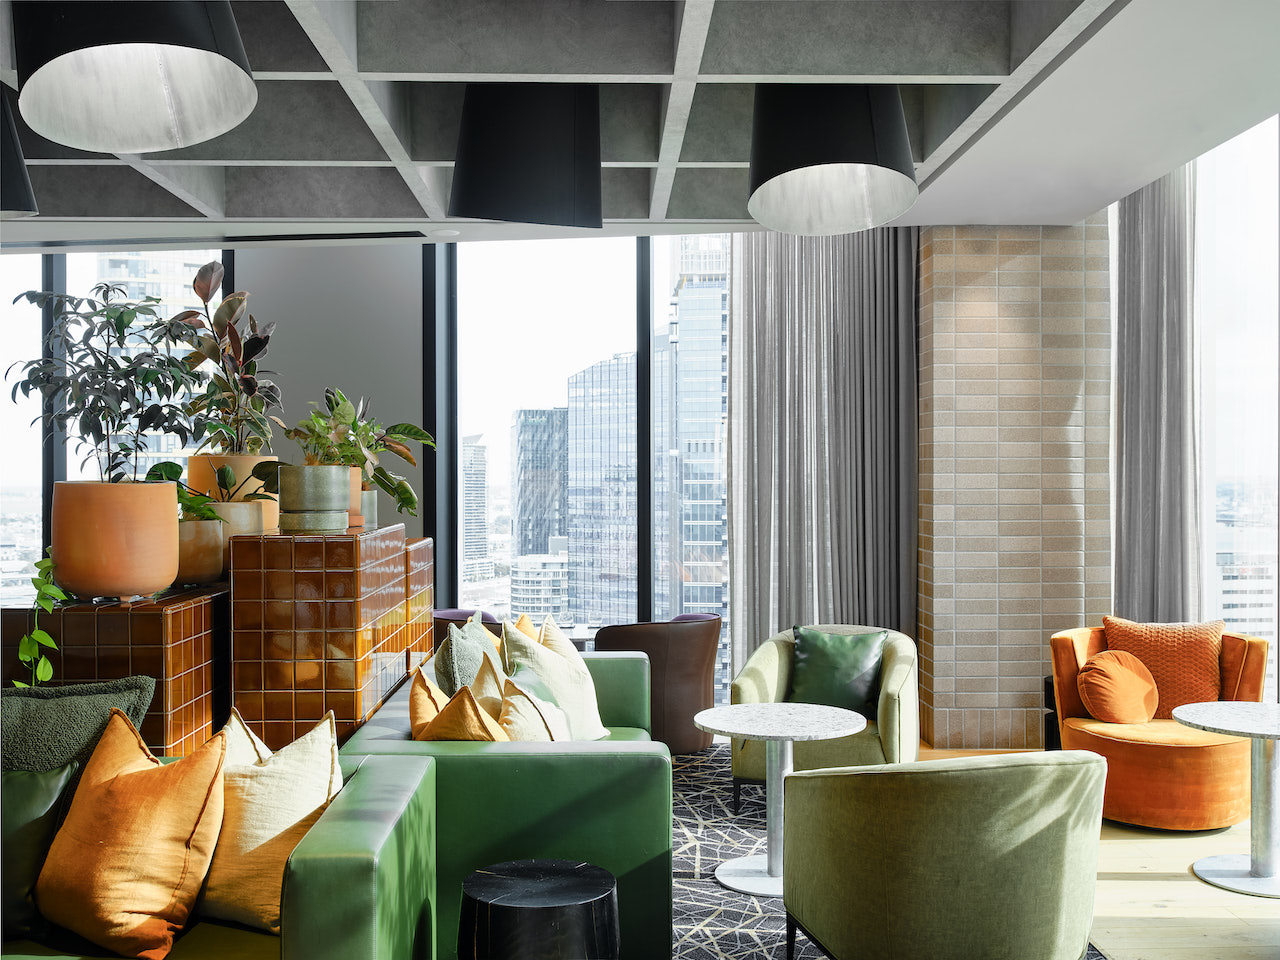 Langlands Restaurant and Bar, a unique, upscale dining destination helmed by head chef Ryan Dunn, has opened at Hyatt Centric Melbourne.